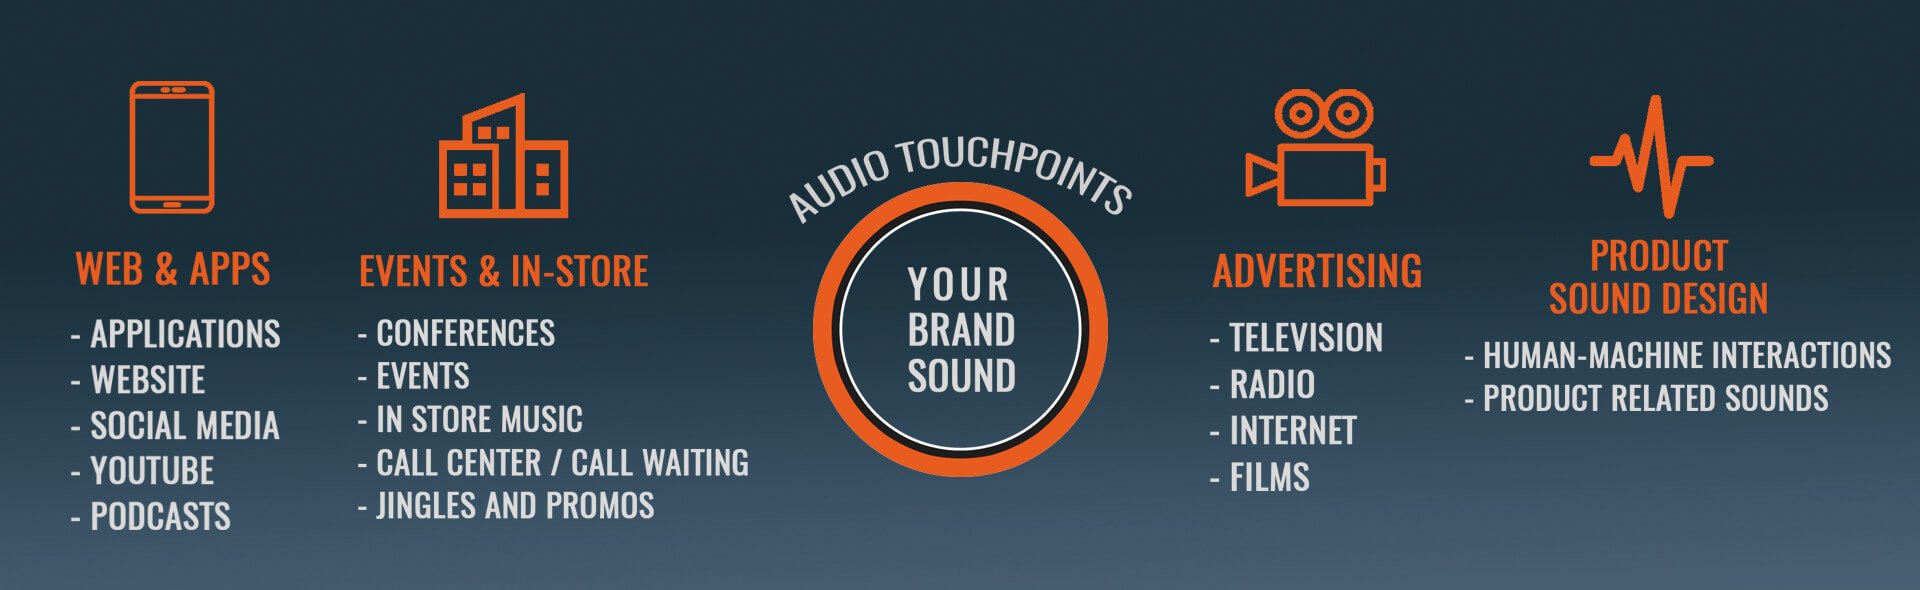 Sound Touchpoints